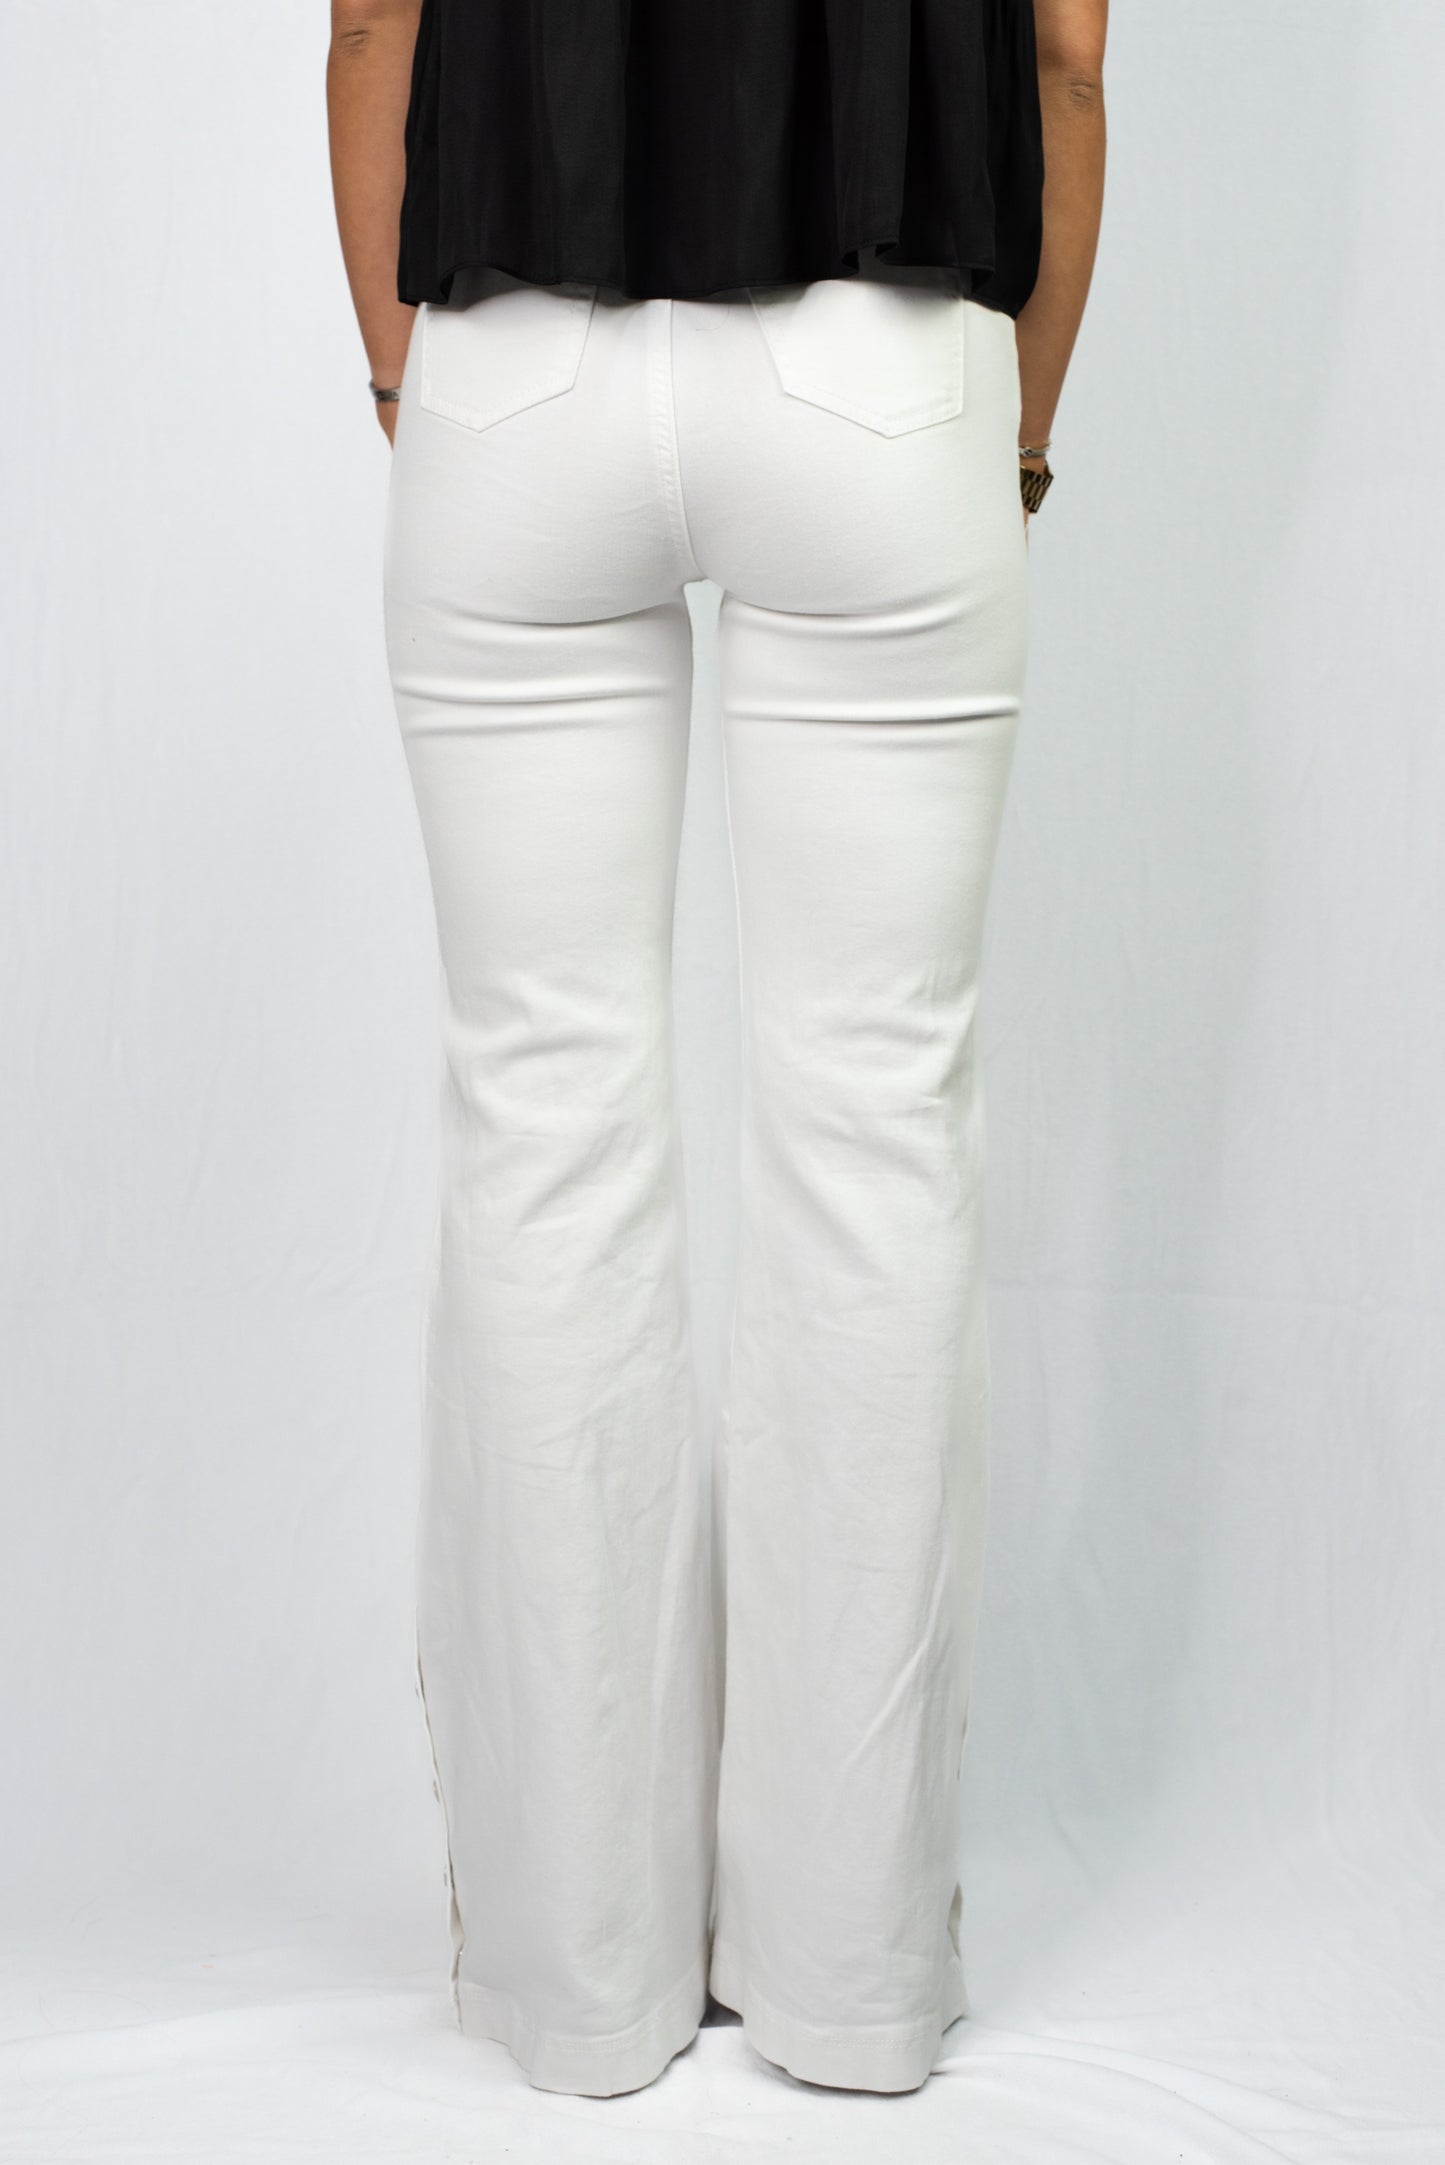 Flying Tomato White Bell Bottom Jeans with Tie Waist